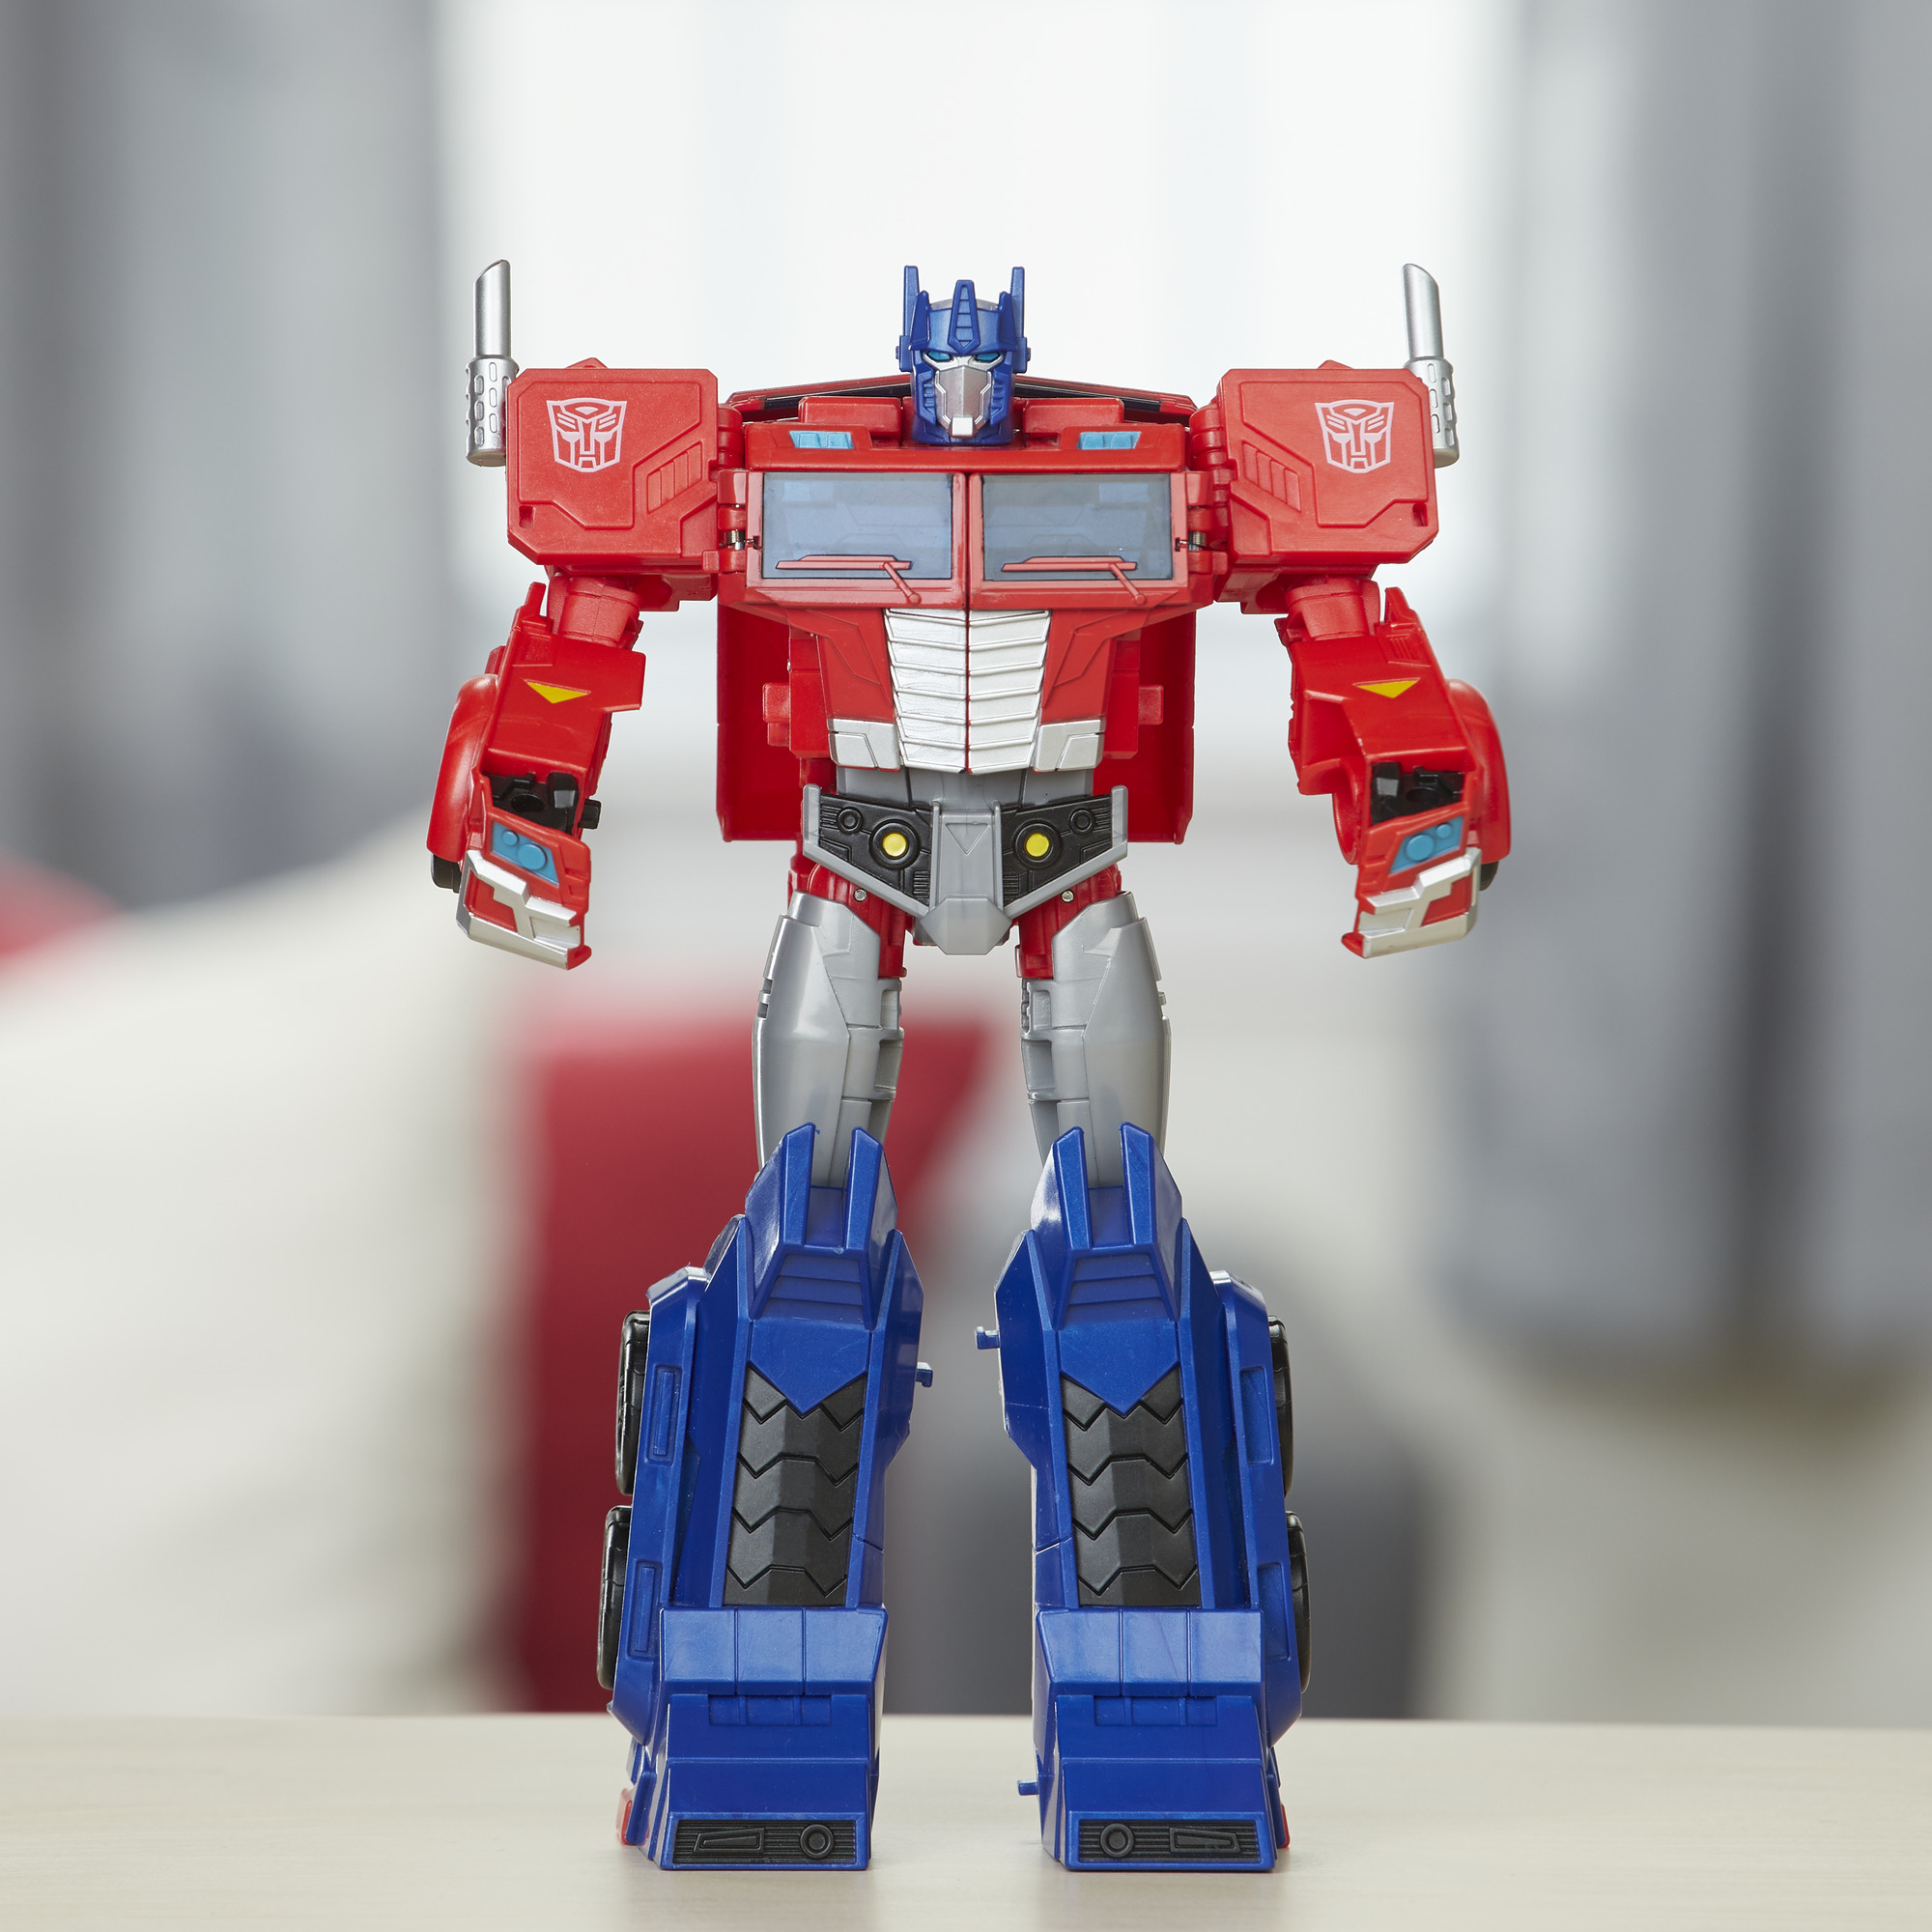 Transformers Cyberverse Ultimate Class Optimus Prime 11.5 Inch Action Figure - image 5 of 9